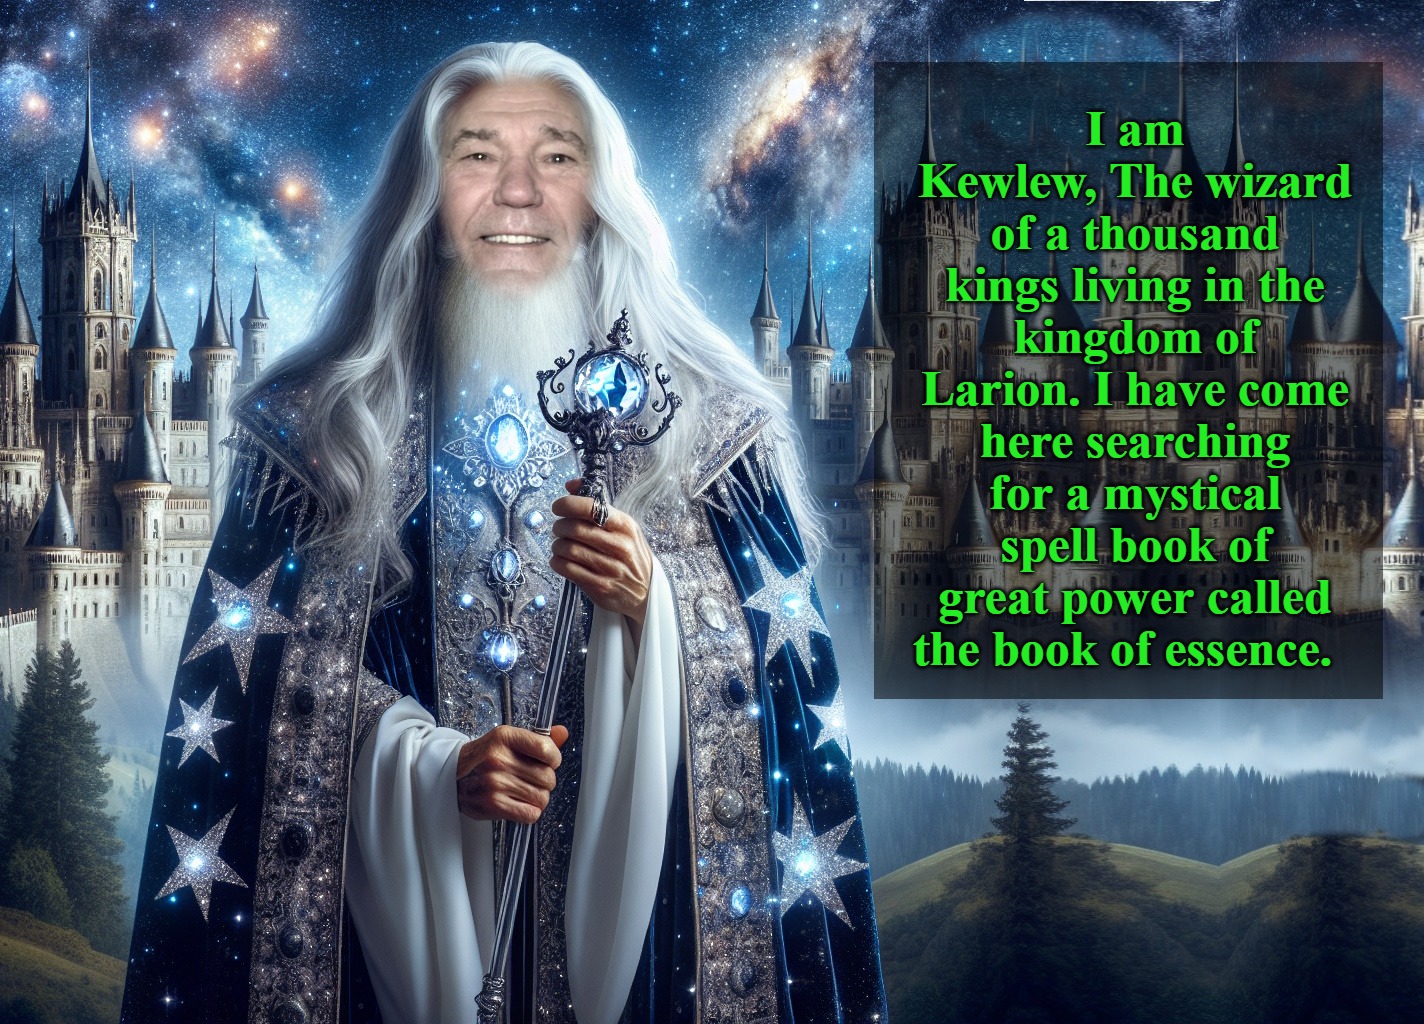 The wizard of a thousand kings | I am Kewlew, The wizard of a thousand kings living in the kingdom of Larion. I have come here searching for a mystical spell book of great power called the book of essence. | image tagged in wizard,kewlew | made w/ Imgflip meme maker